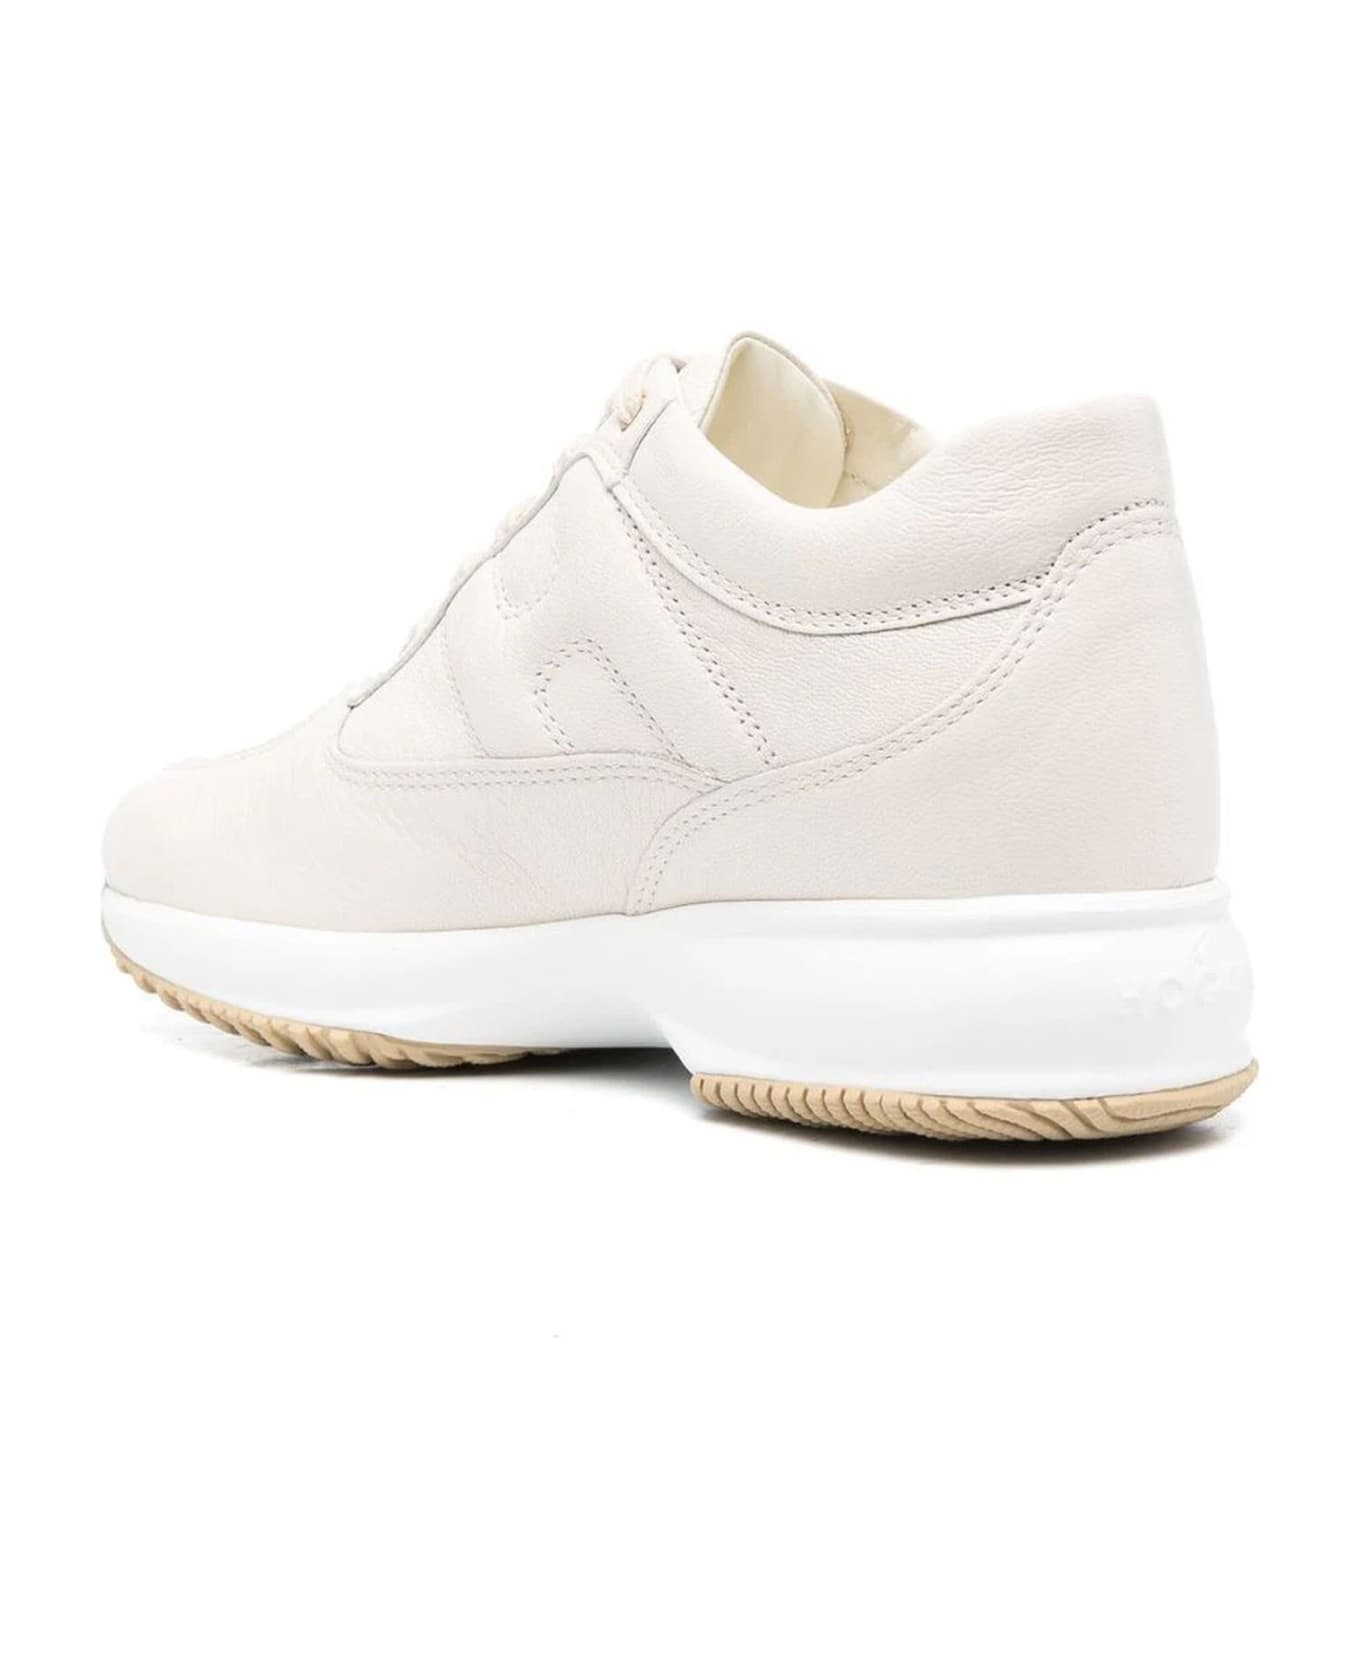 Hogan Interactive Lace-up Sneakers - White スニーカー